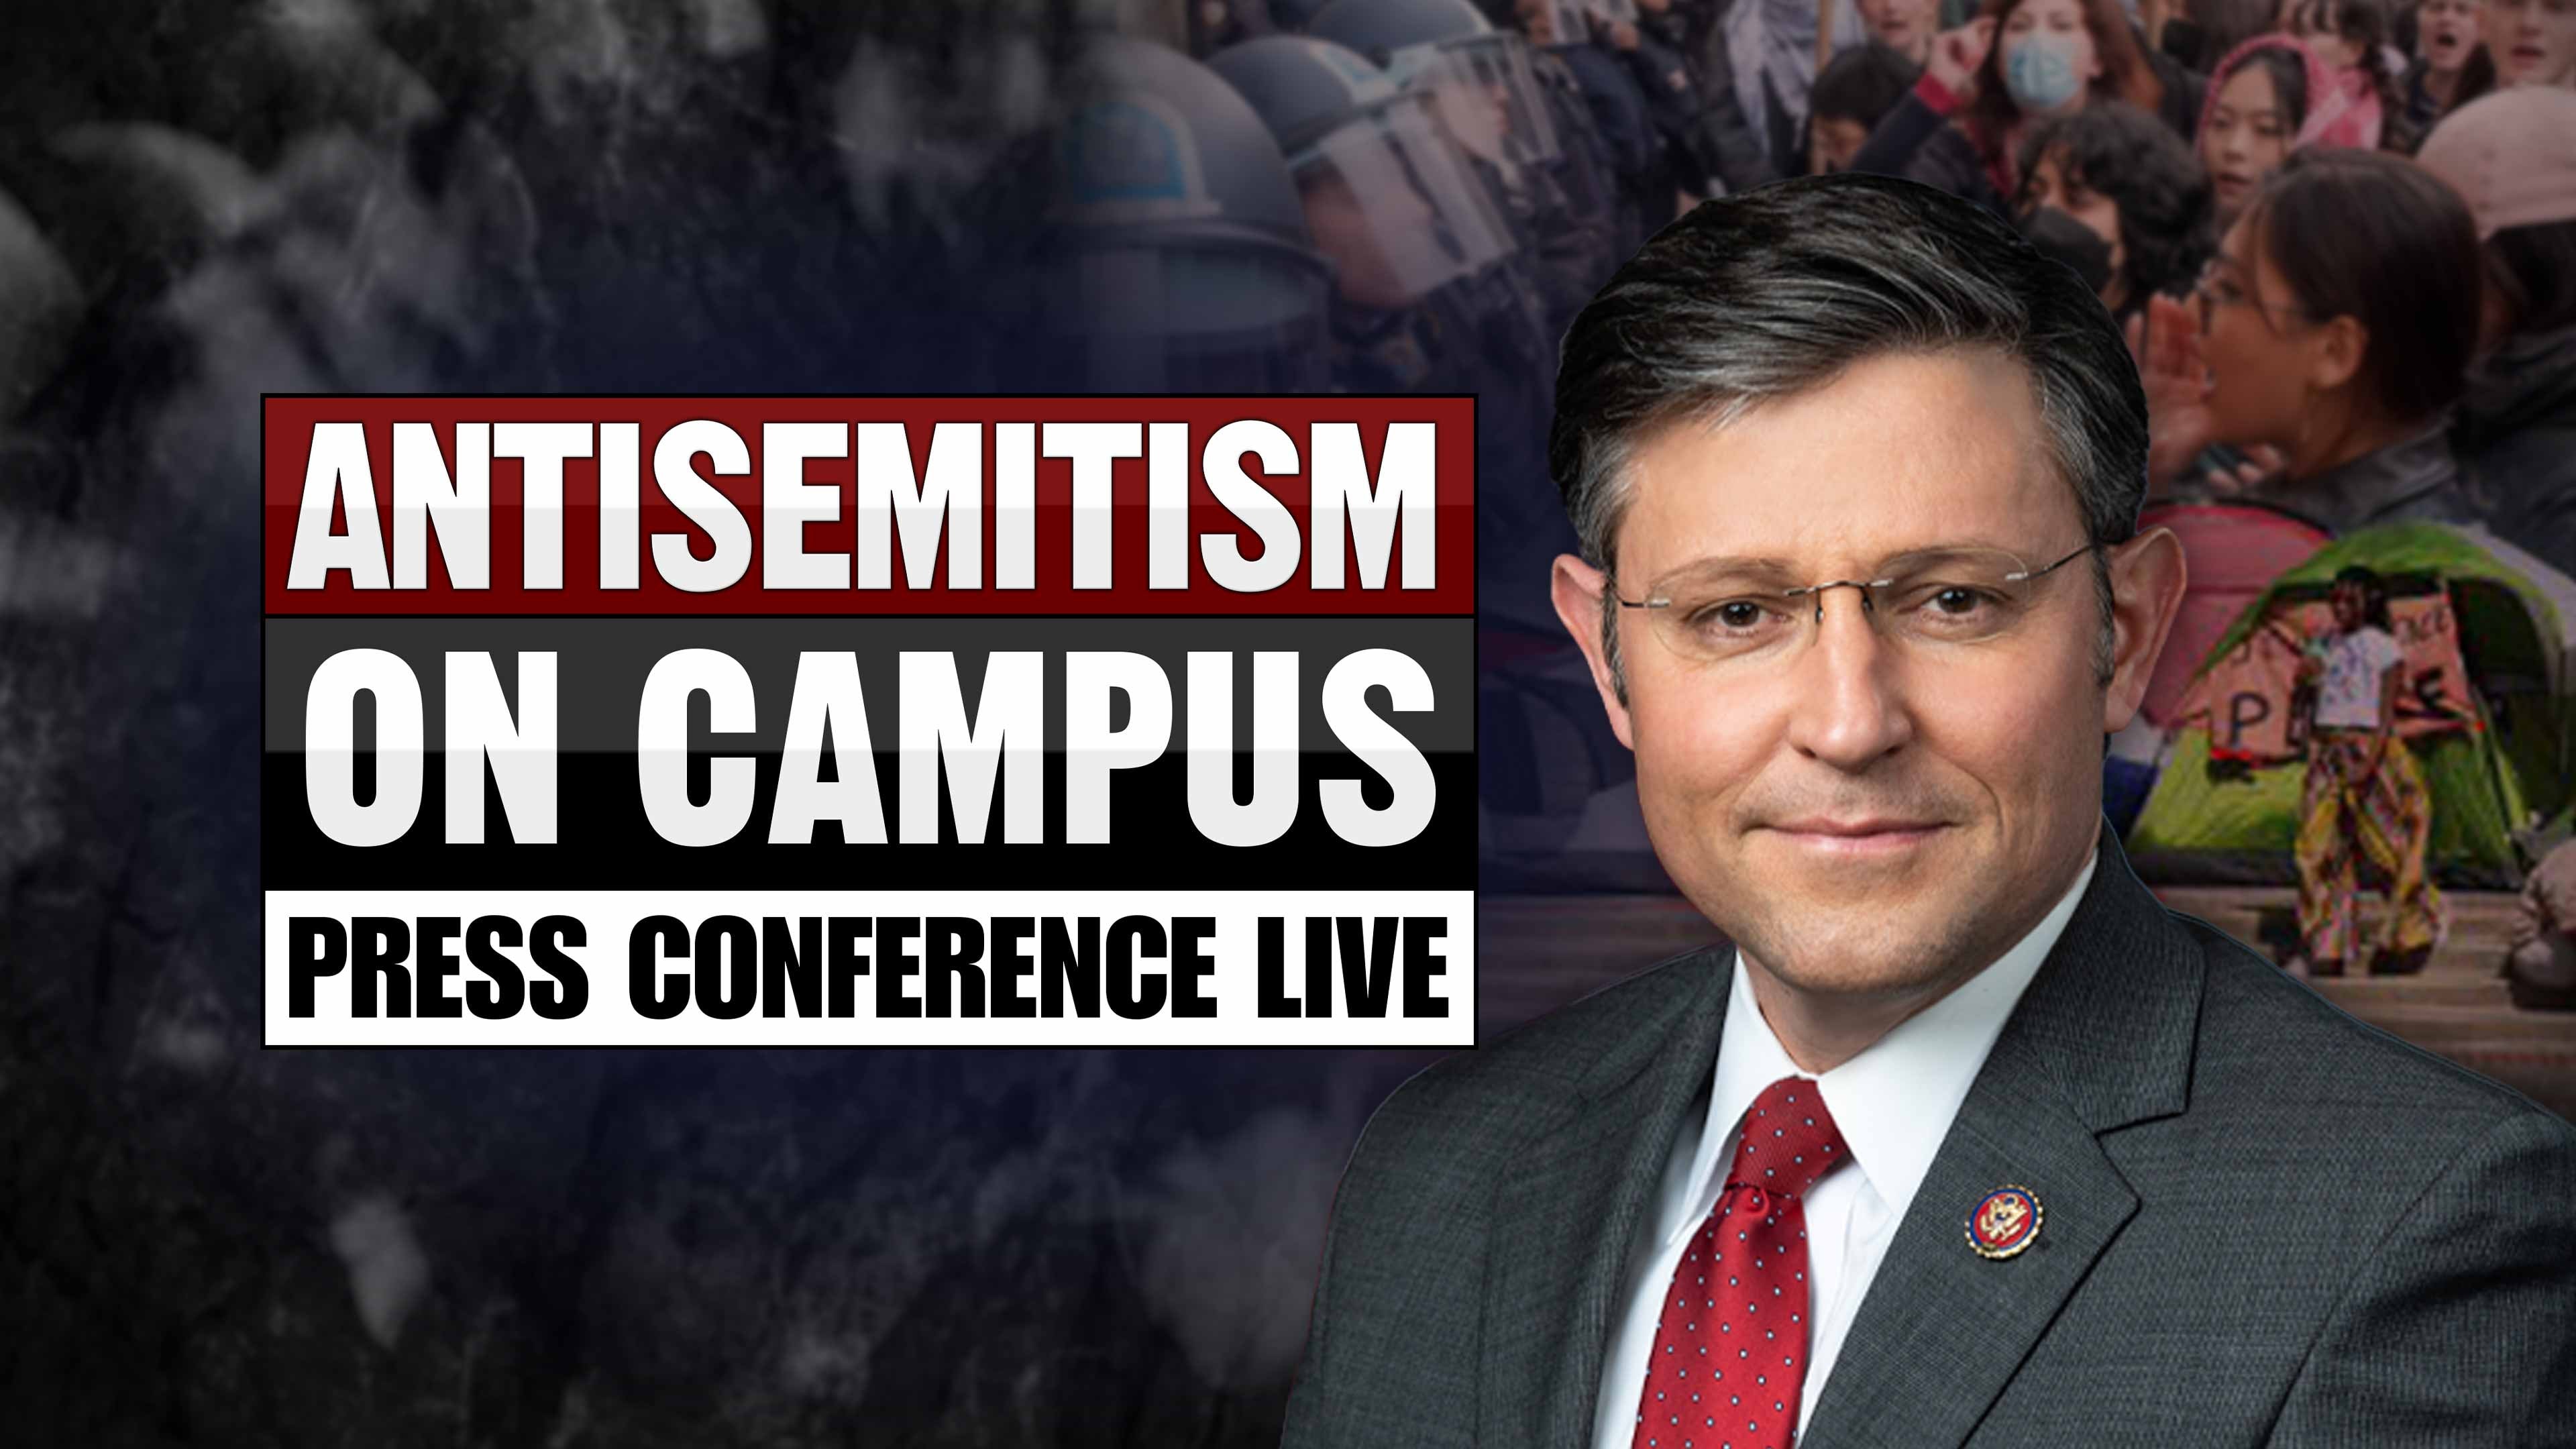 Antisemitism on Campus: Press Conference Live